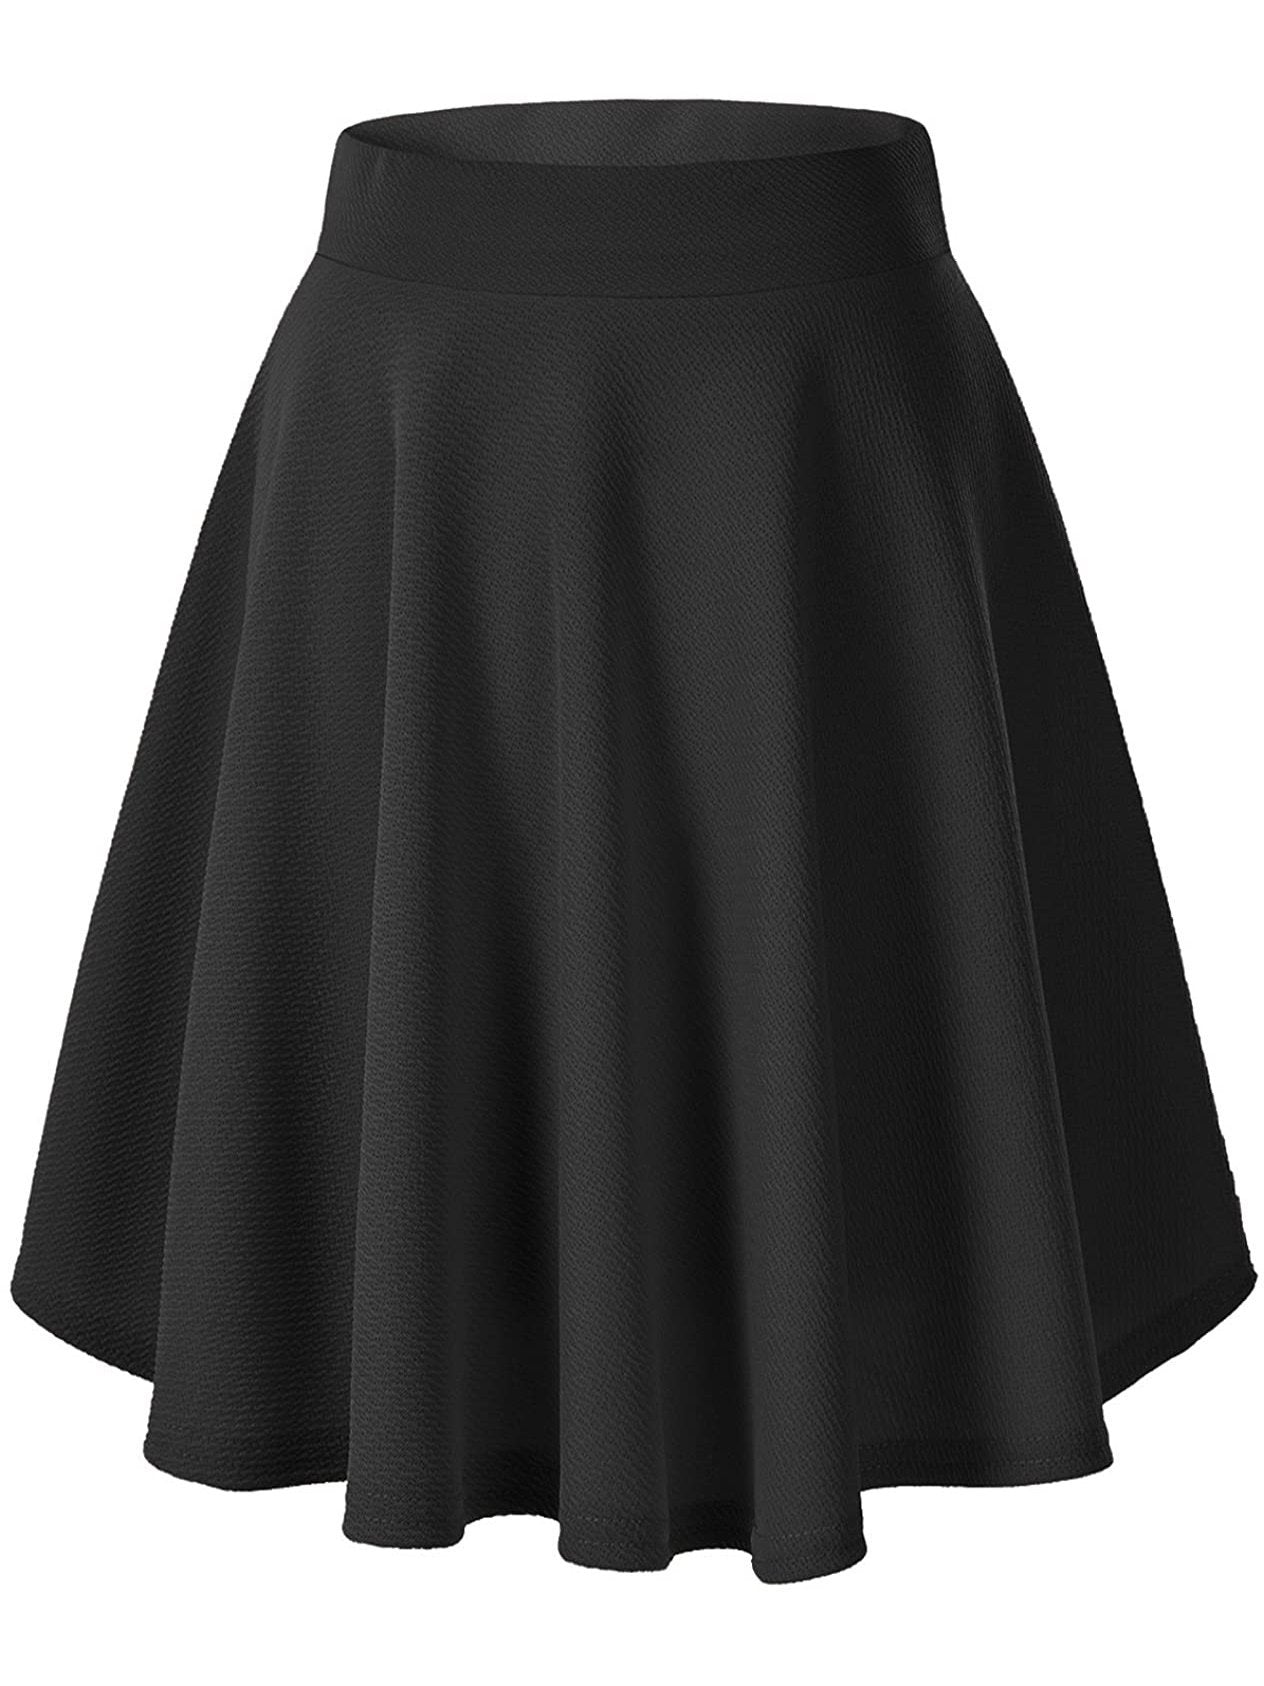 Women's Basic Versatile Stretchy Flared Casual Mini Skater Skirt - Skirts - MsDressly | Online Fashion Free Shipping Clothing, Dresses, Tops, Shoes - 15/03/ - 2XL - Autumn